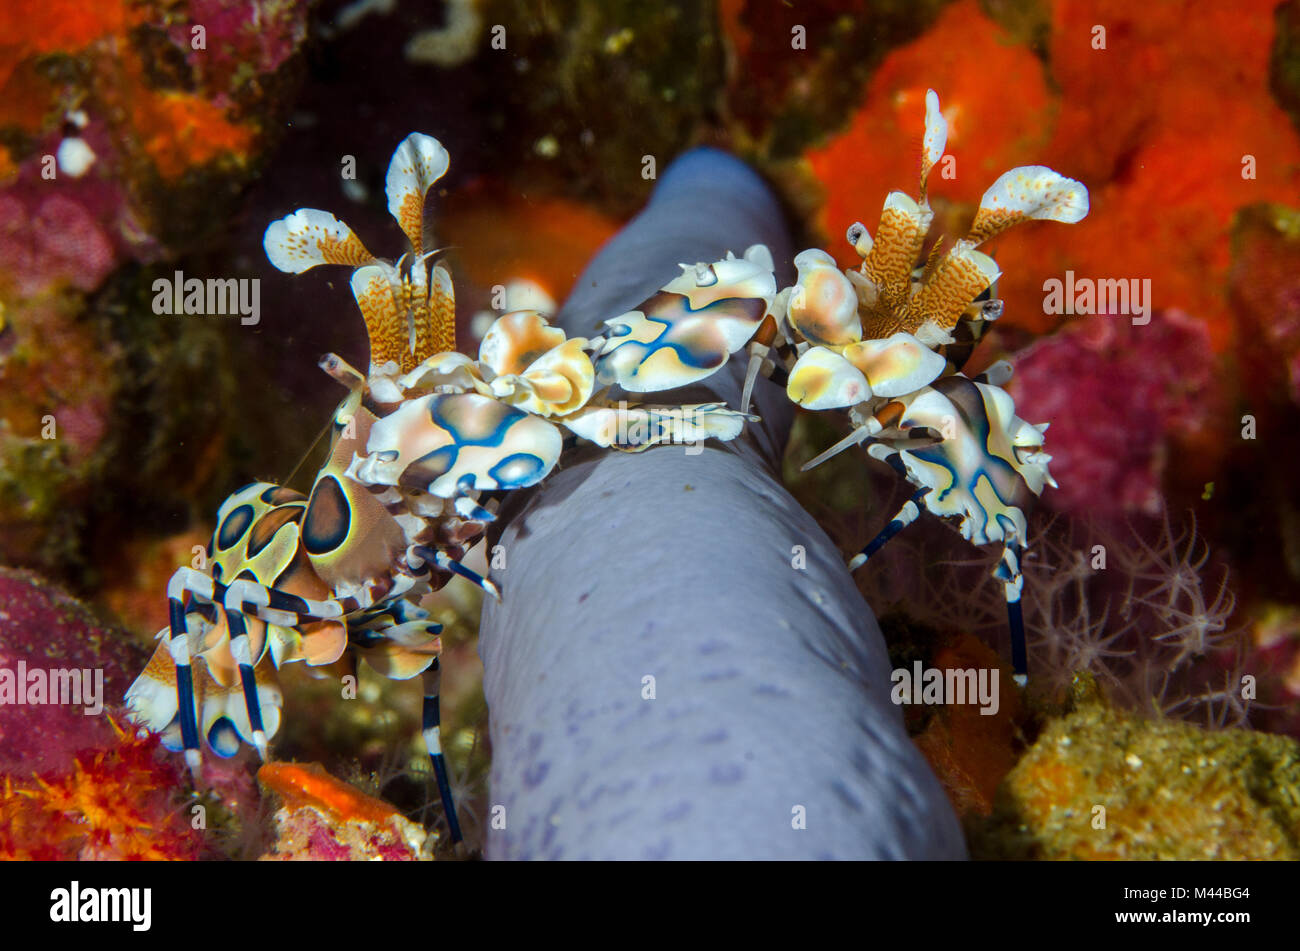 Couple of Hymenocera picta, known as harlequin shrimps, eating a blue seastar (Linckia laevigata) on the coral reefs in the Indian Ocean Stock Photo